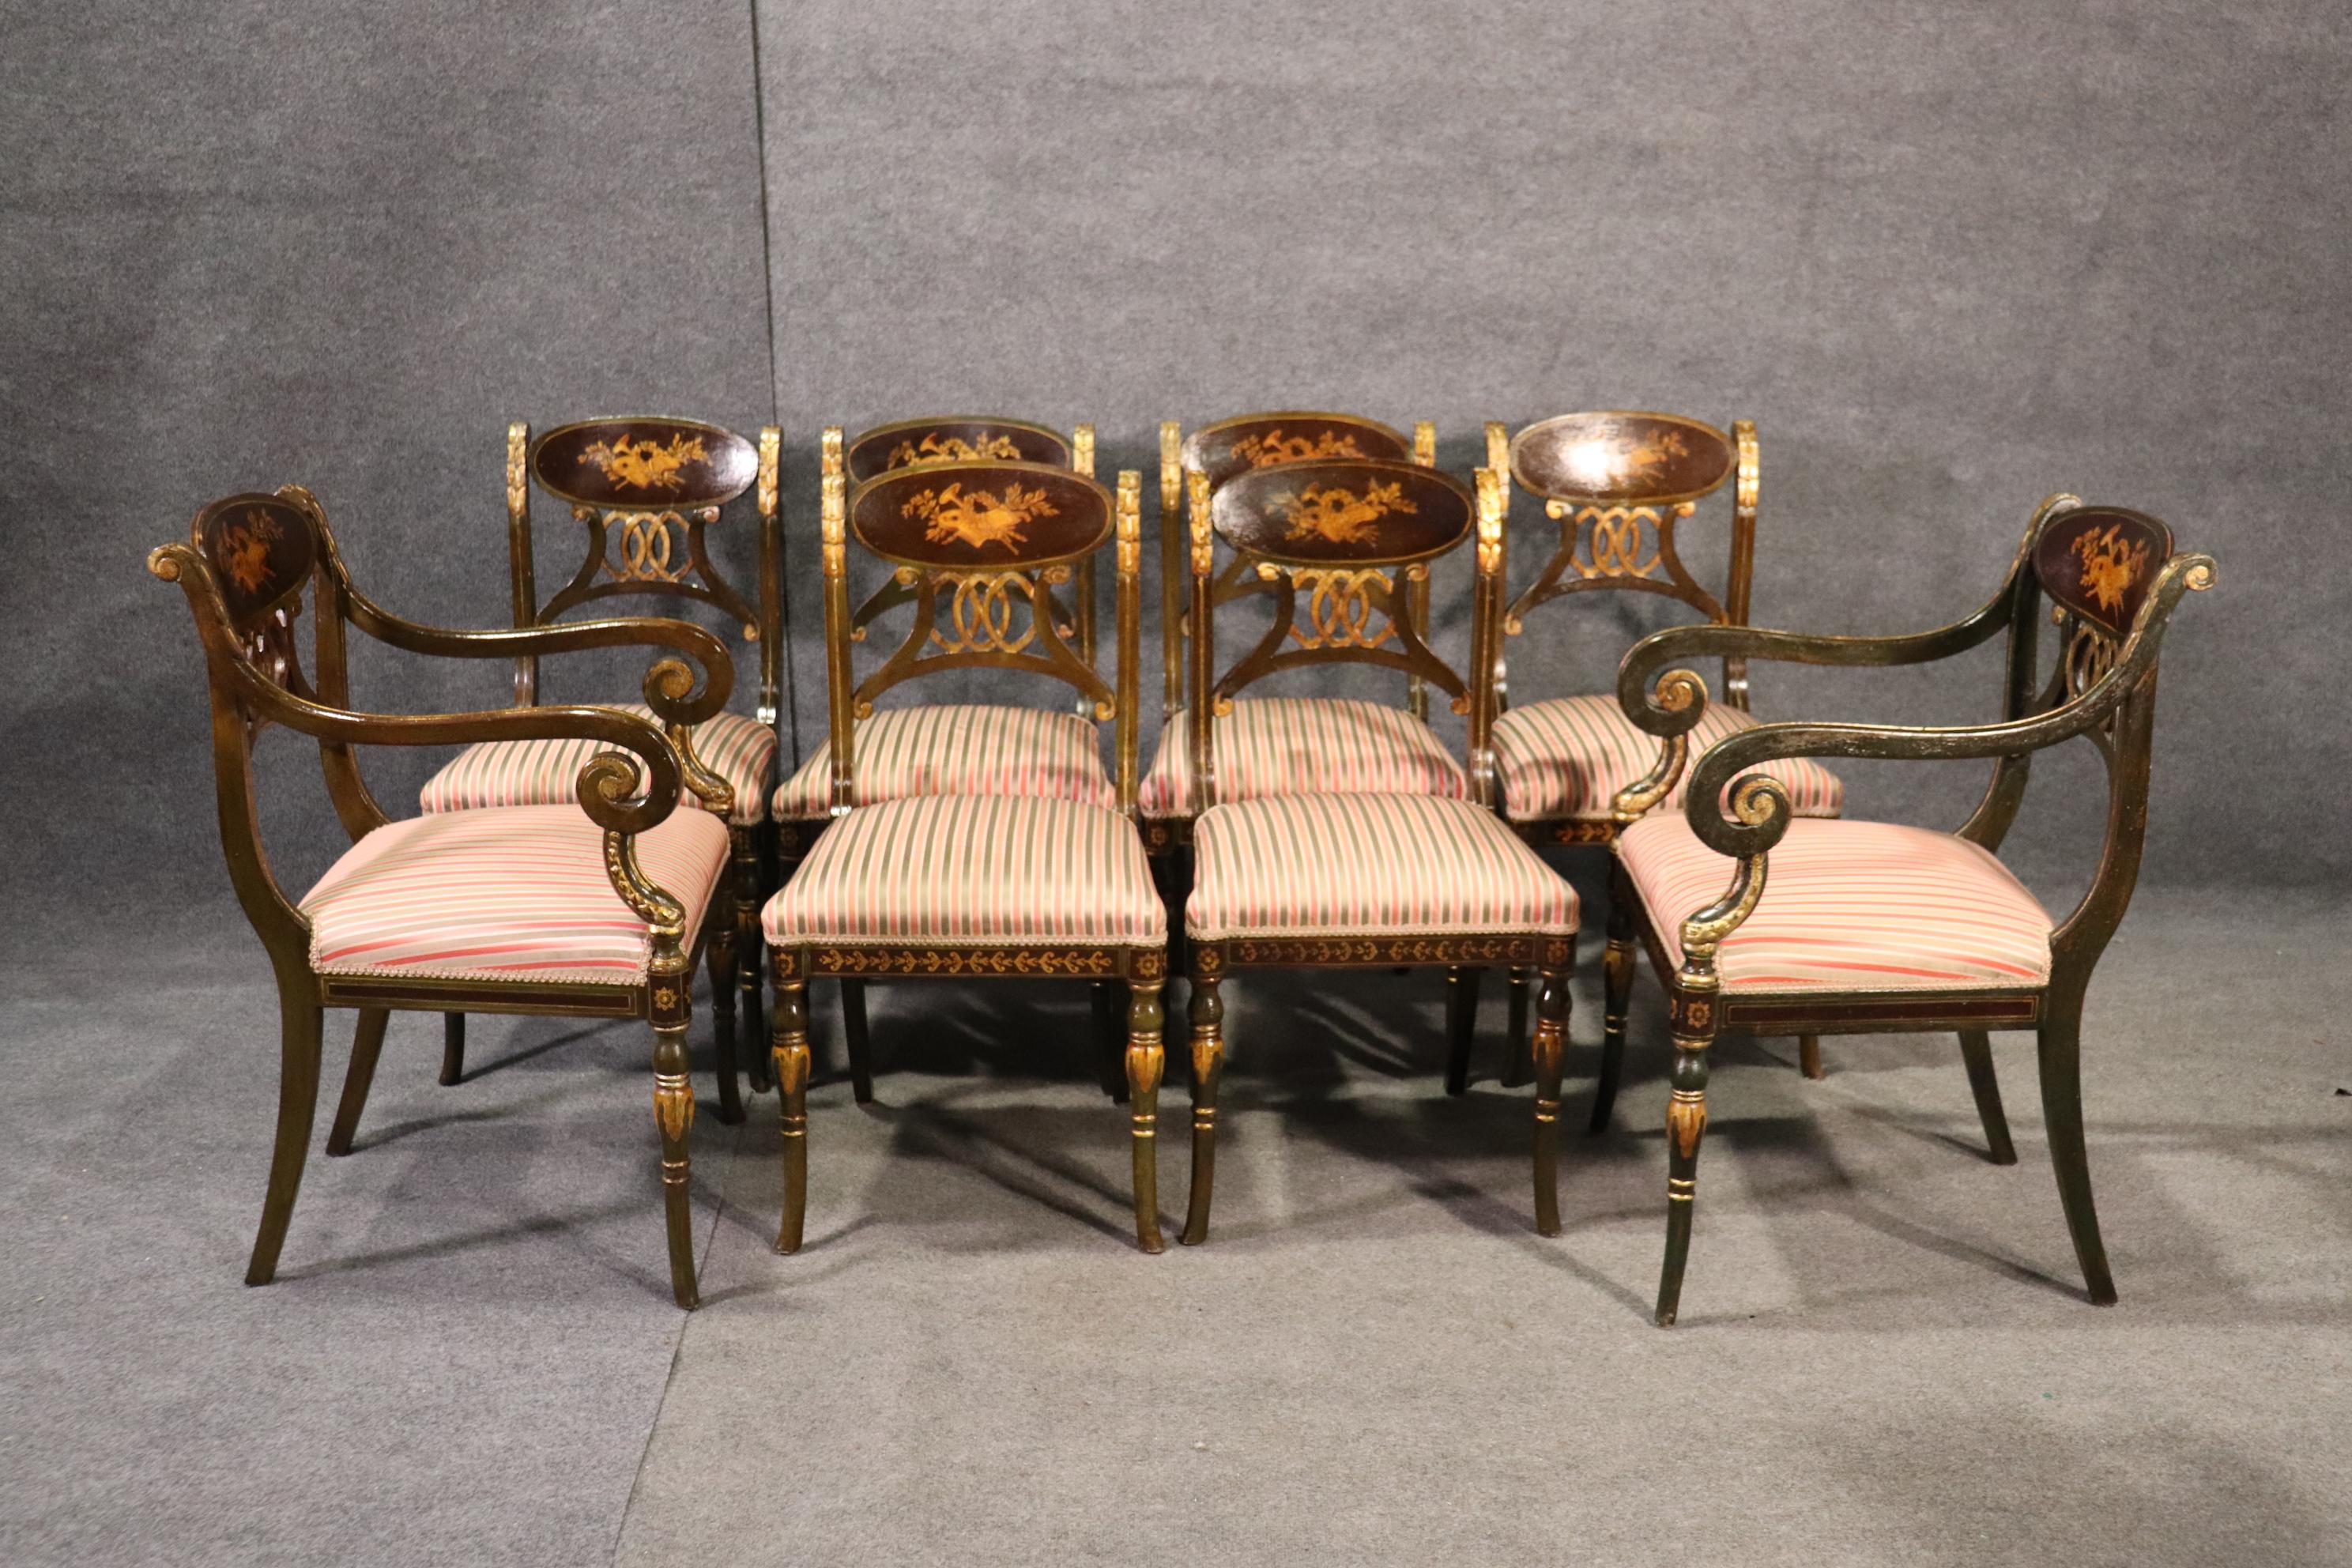 Beech Set 8 Painted and Gilded Regency Style Dining Chairs with Musical Instruments 